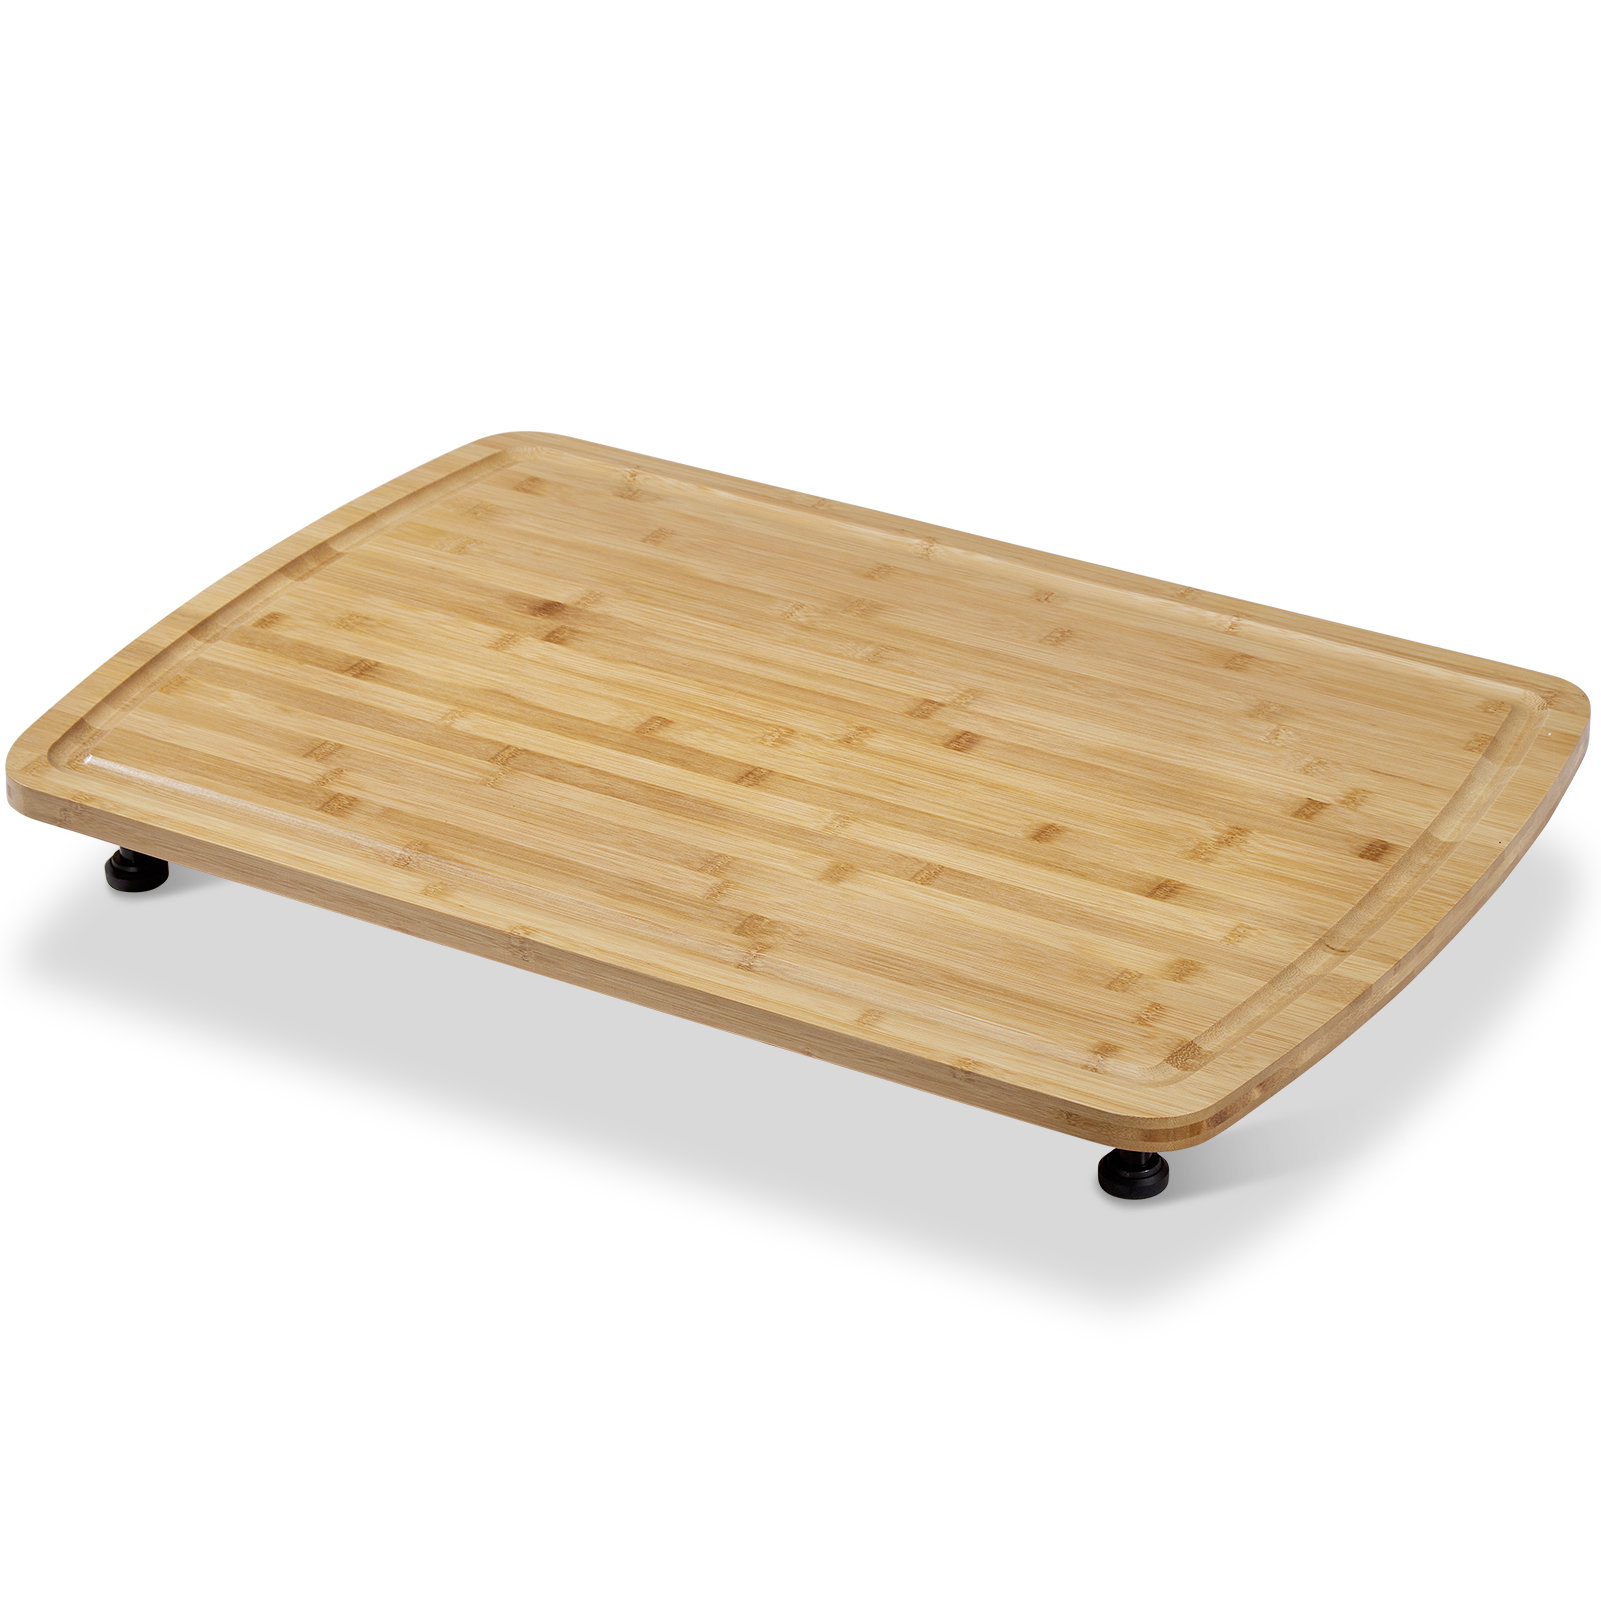 Dual-purpose Bamboo Stovetop cover workspace and Countertop